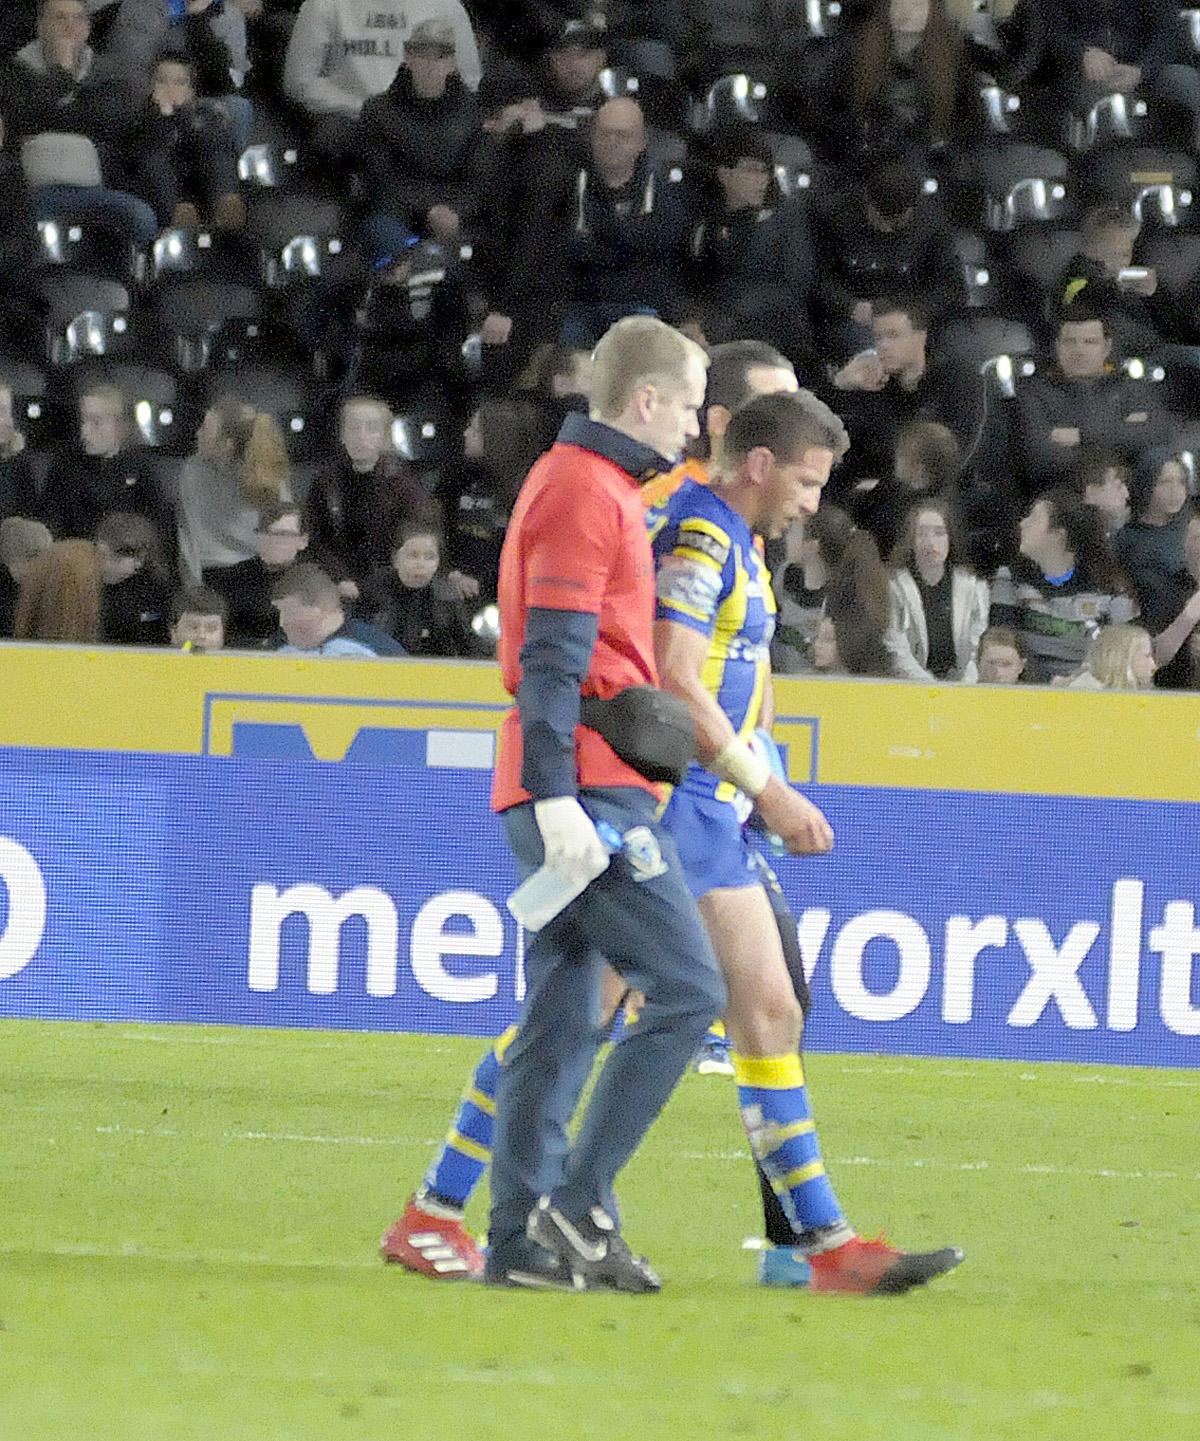 All the action from Hull FC v Warrington Wolves in Betfred Super League Round 12 at the KCOM Stadium. Pictures by Mike Boden